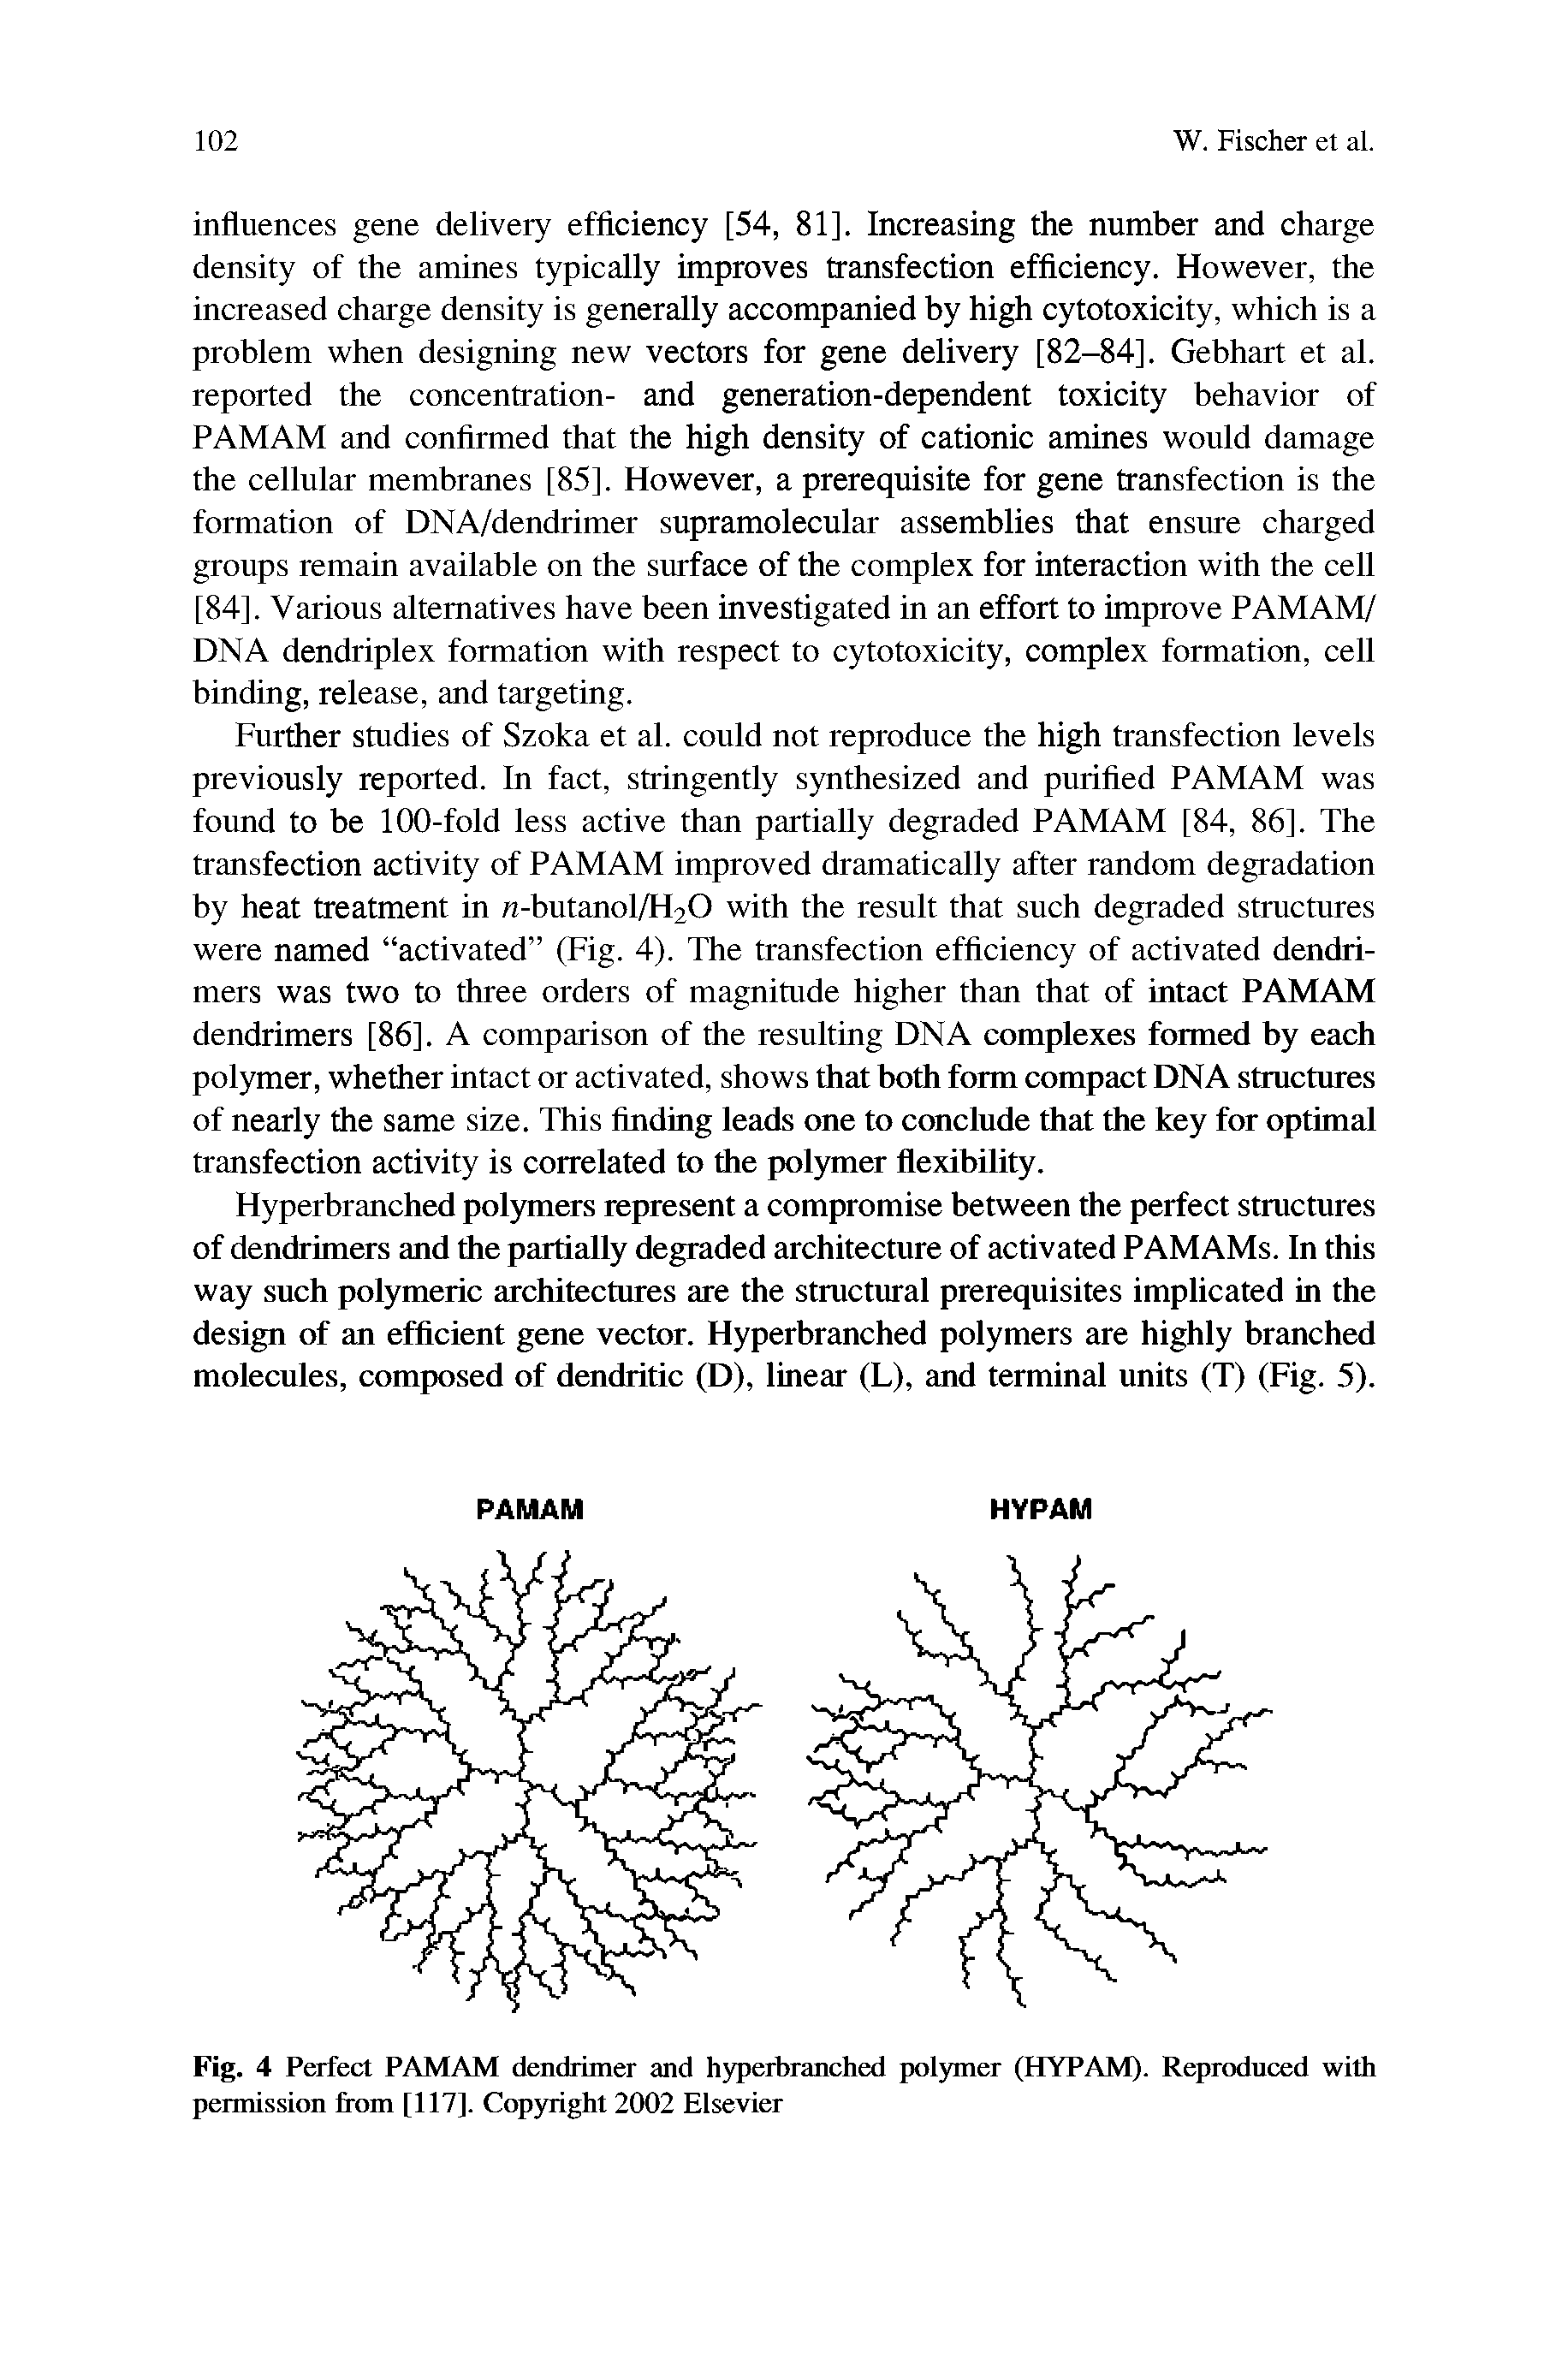 Fig. 4 Perfect PAMAM dendrimer and hyperbranched polymer (HYPAM). Reproduced with permission from [117]. Copyright 2002 Elsevier...